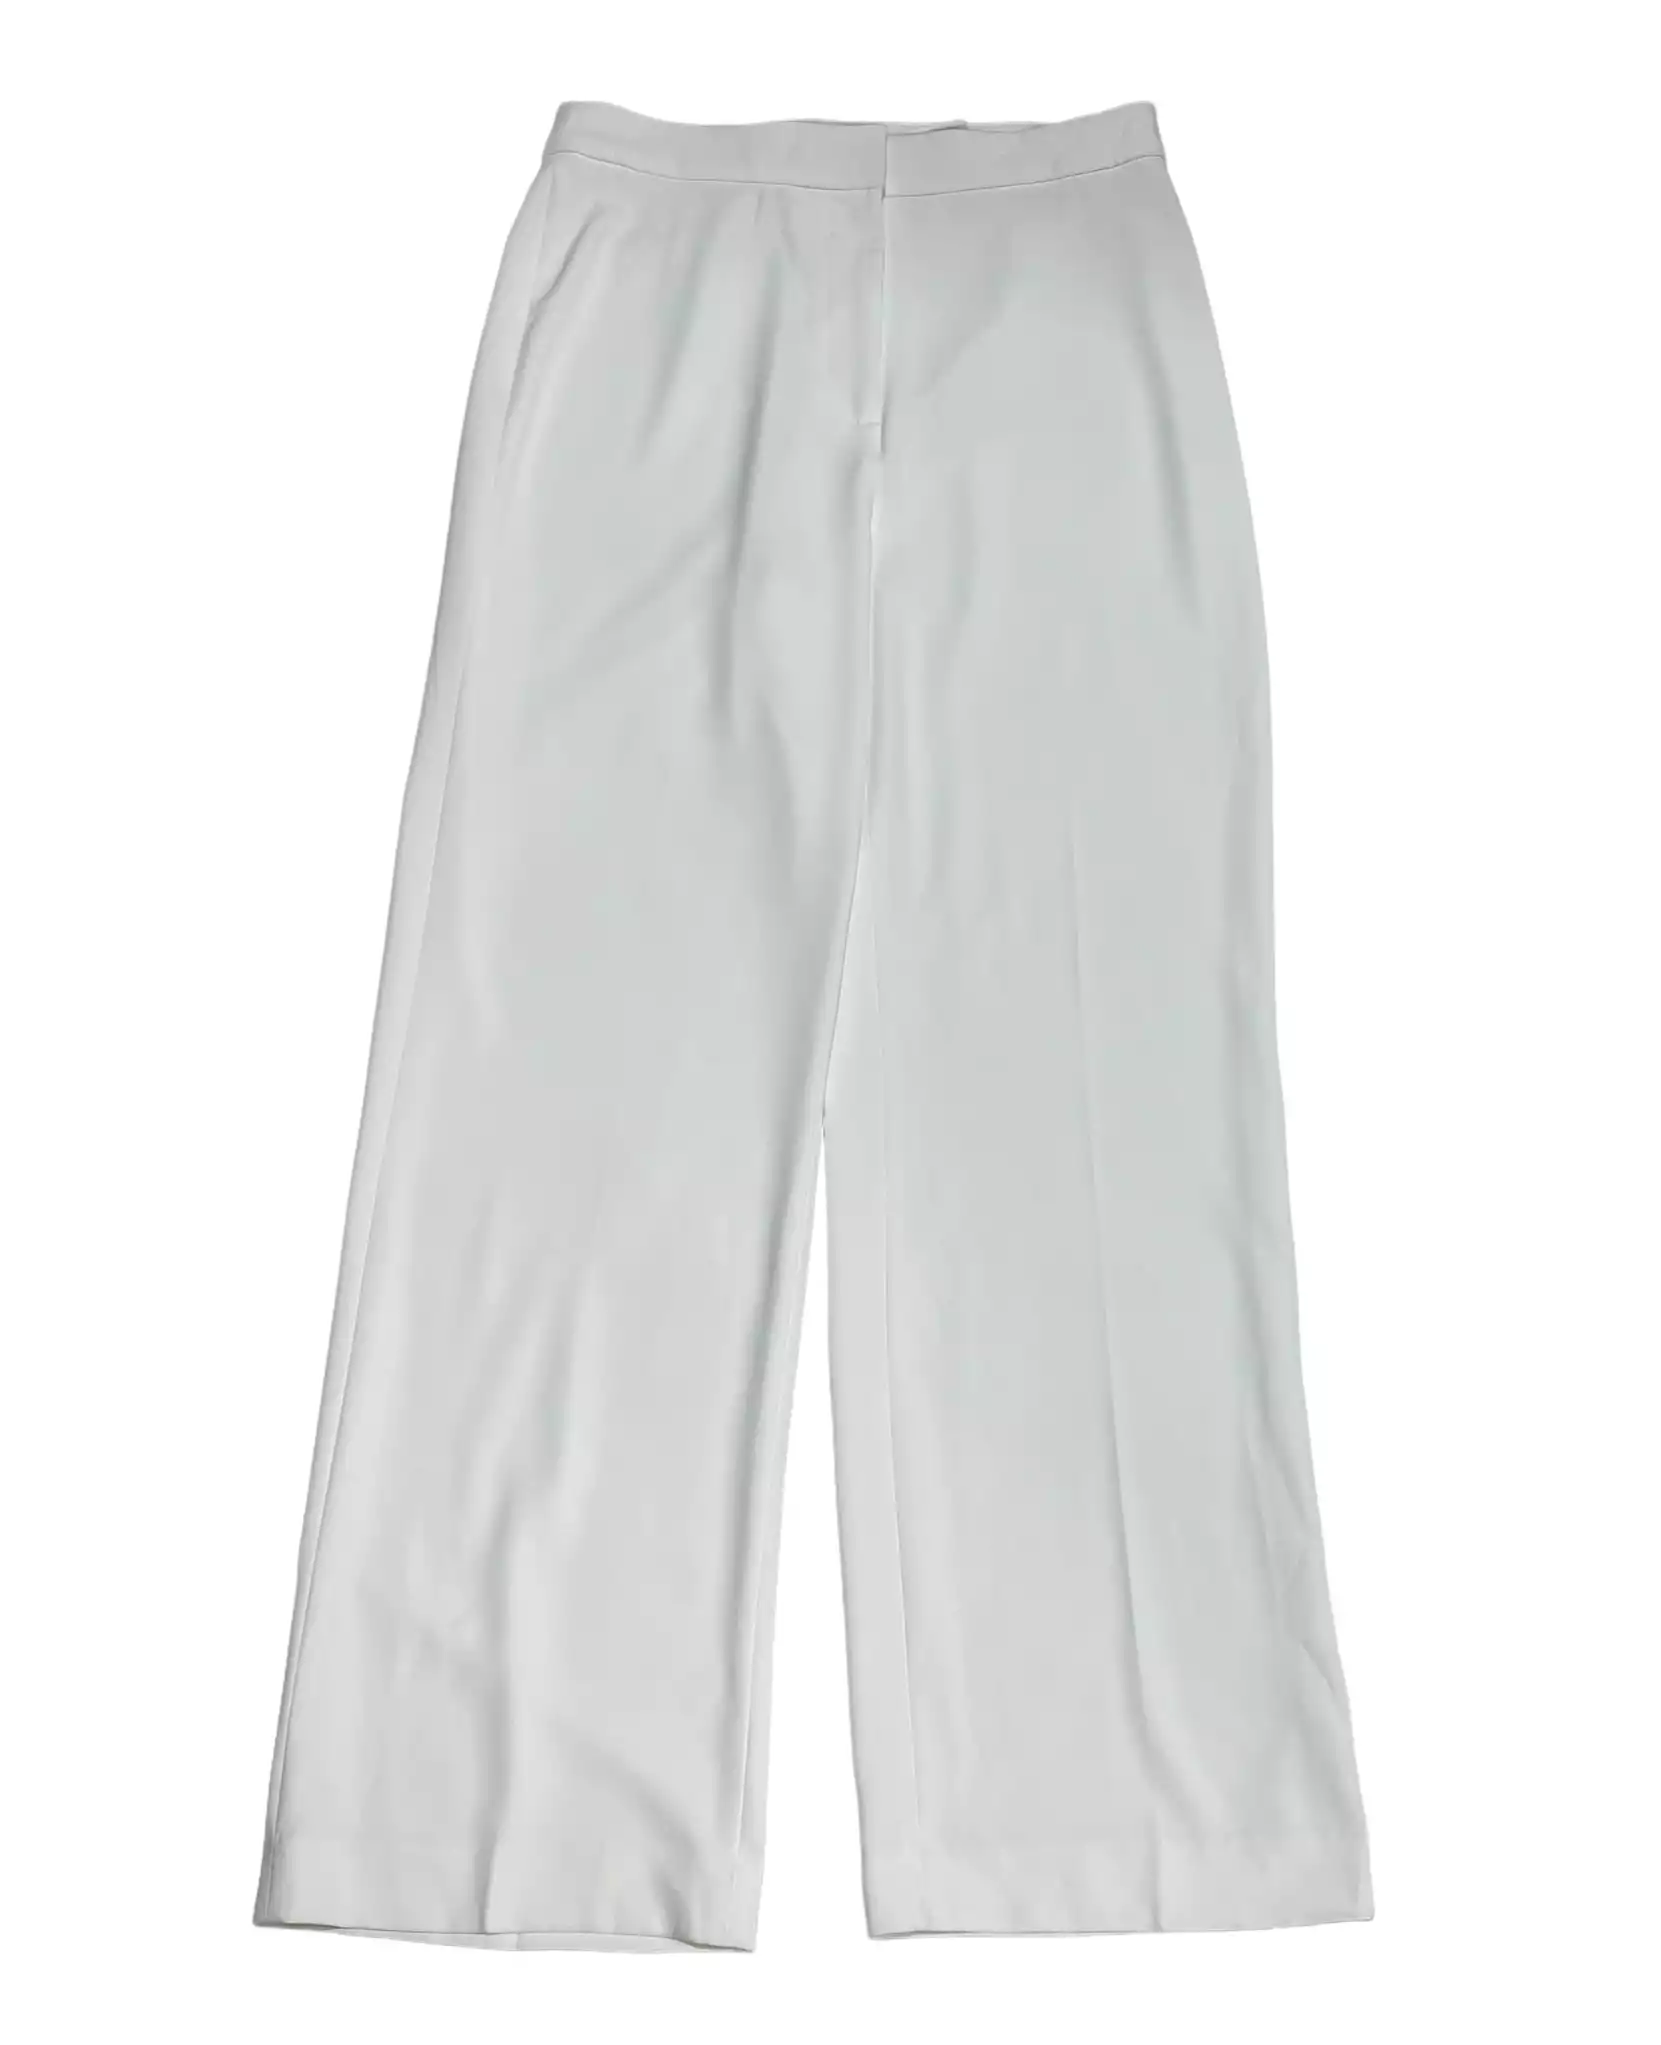 Trousers by H&M